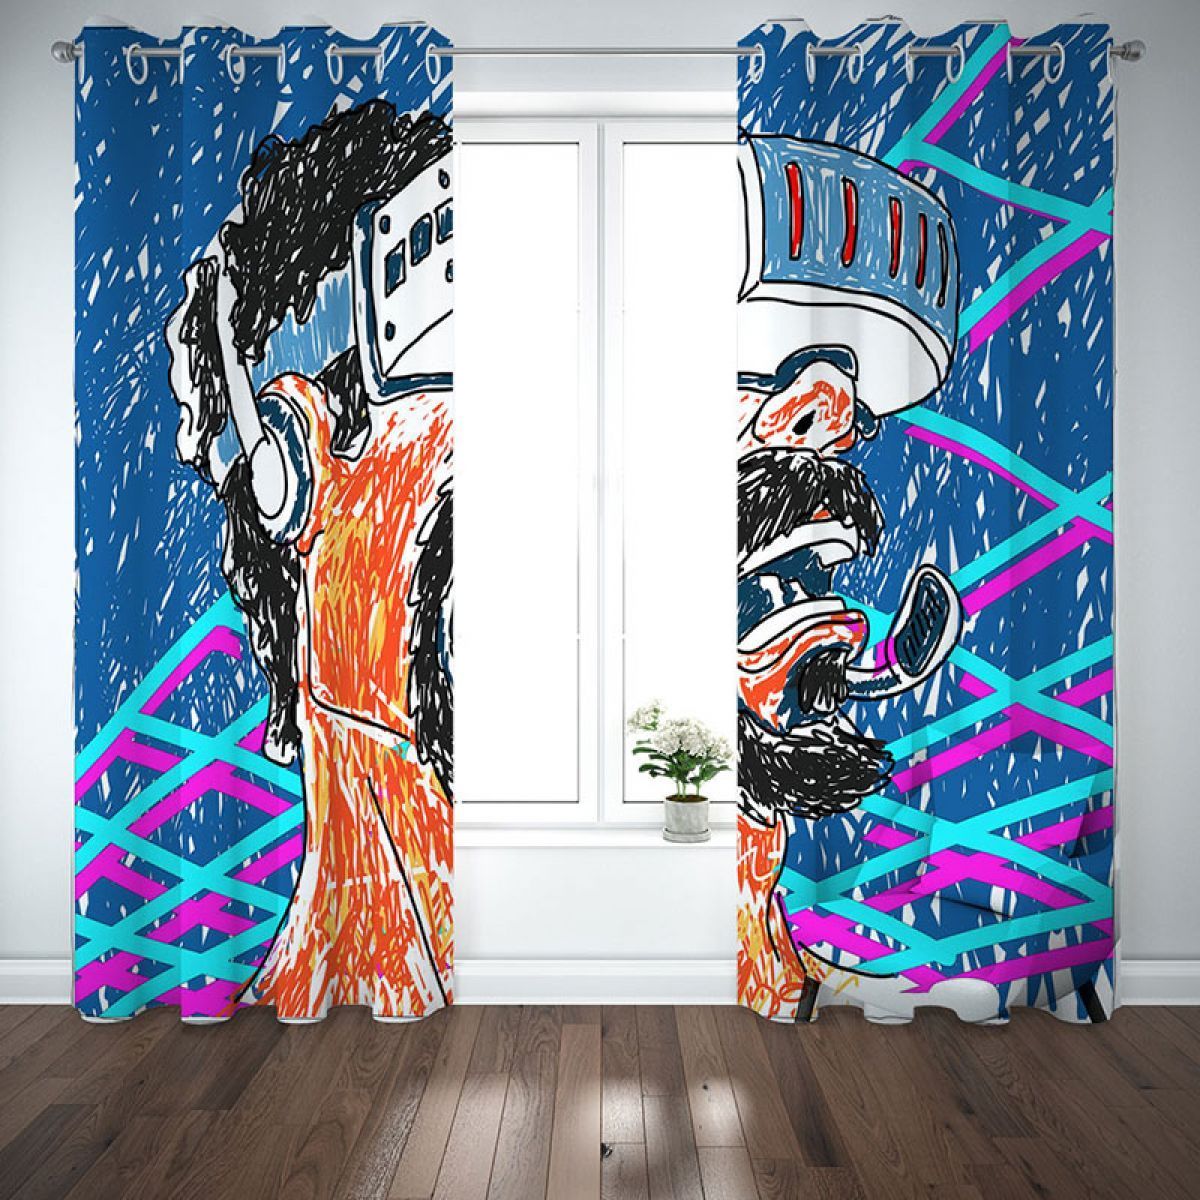 3d Man With Virtual Reality Glasses Printed Window Curtain Home Decor